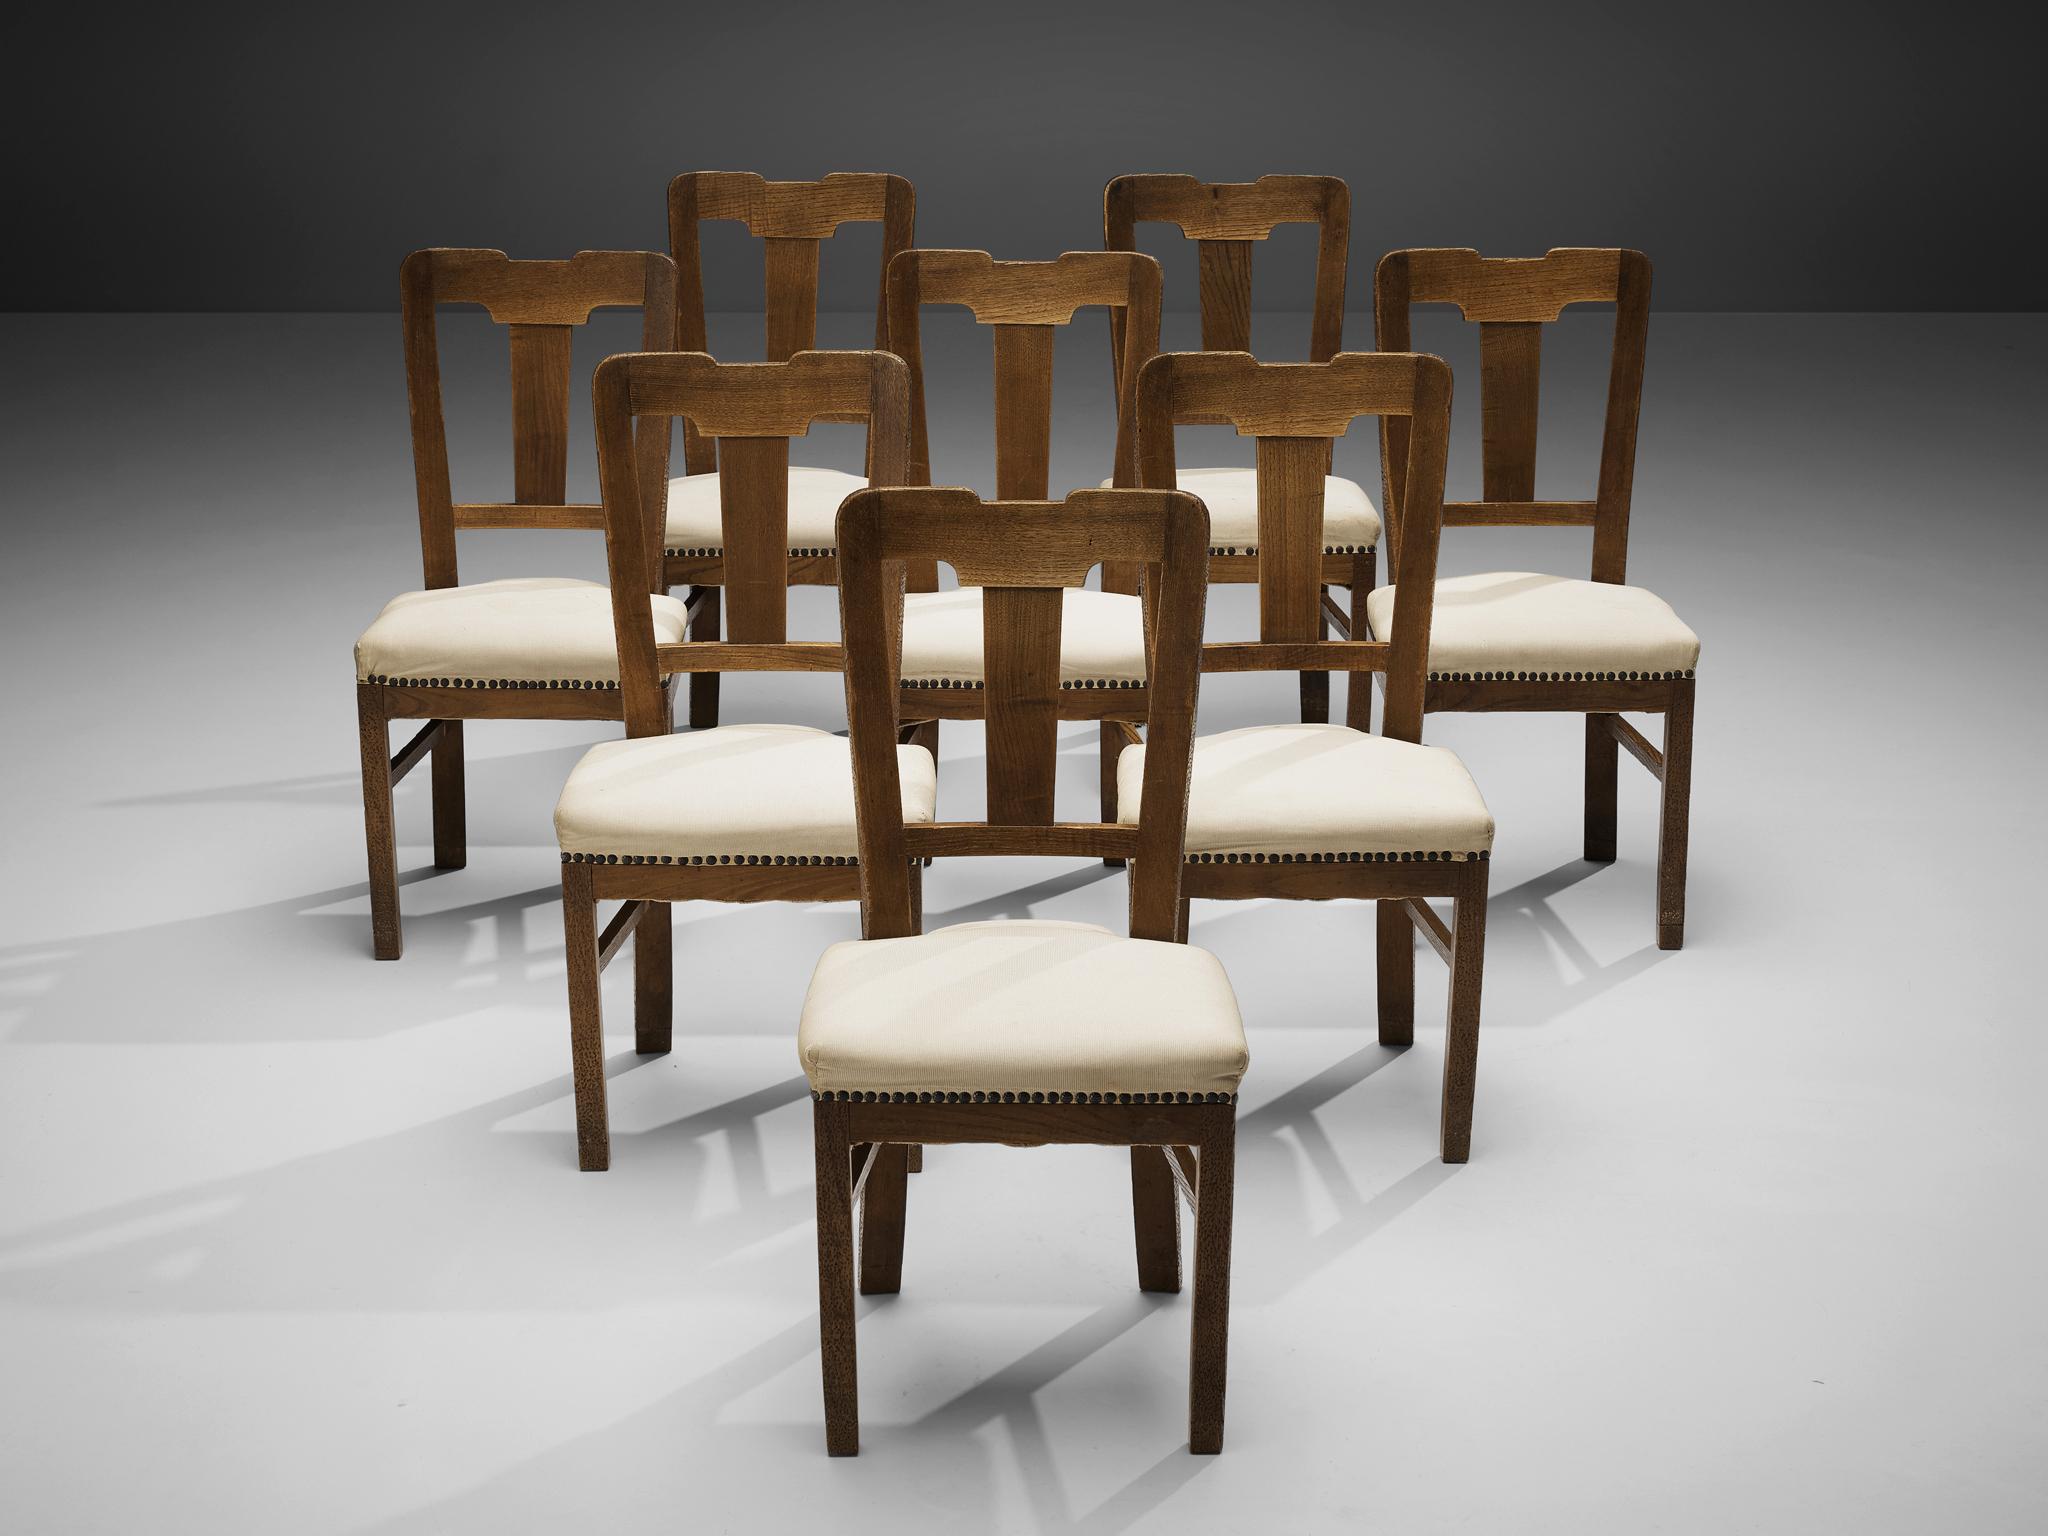 Ernesto Valabrega, set of eight dining chairs, stained oak, fabric upholstery, Italy, ca. 1935

This set of dining chairs by Ernesto Valabrega not only shows a well-balanced backrest but also lovely details like the brass nails holding the seating